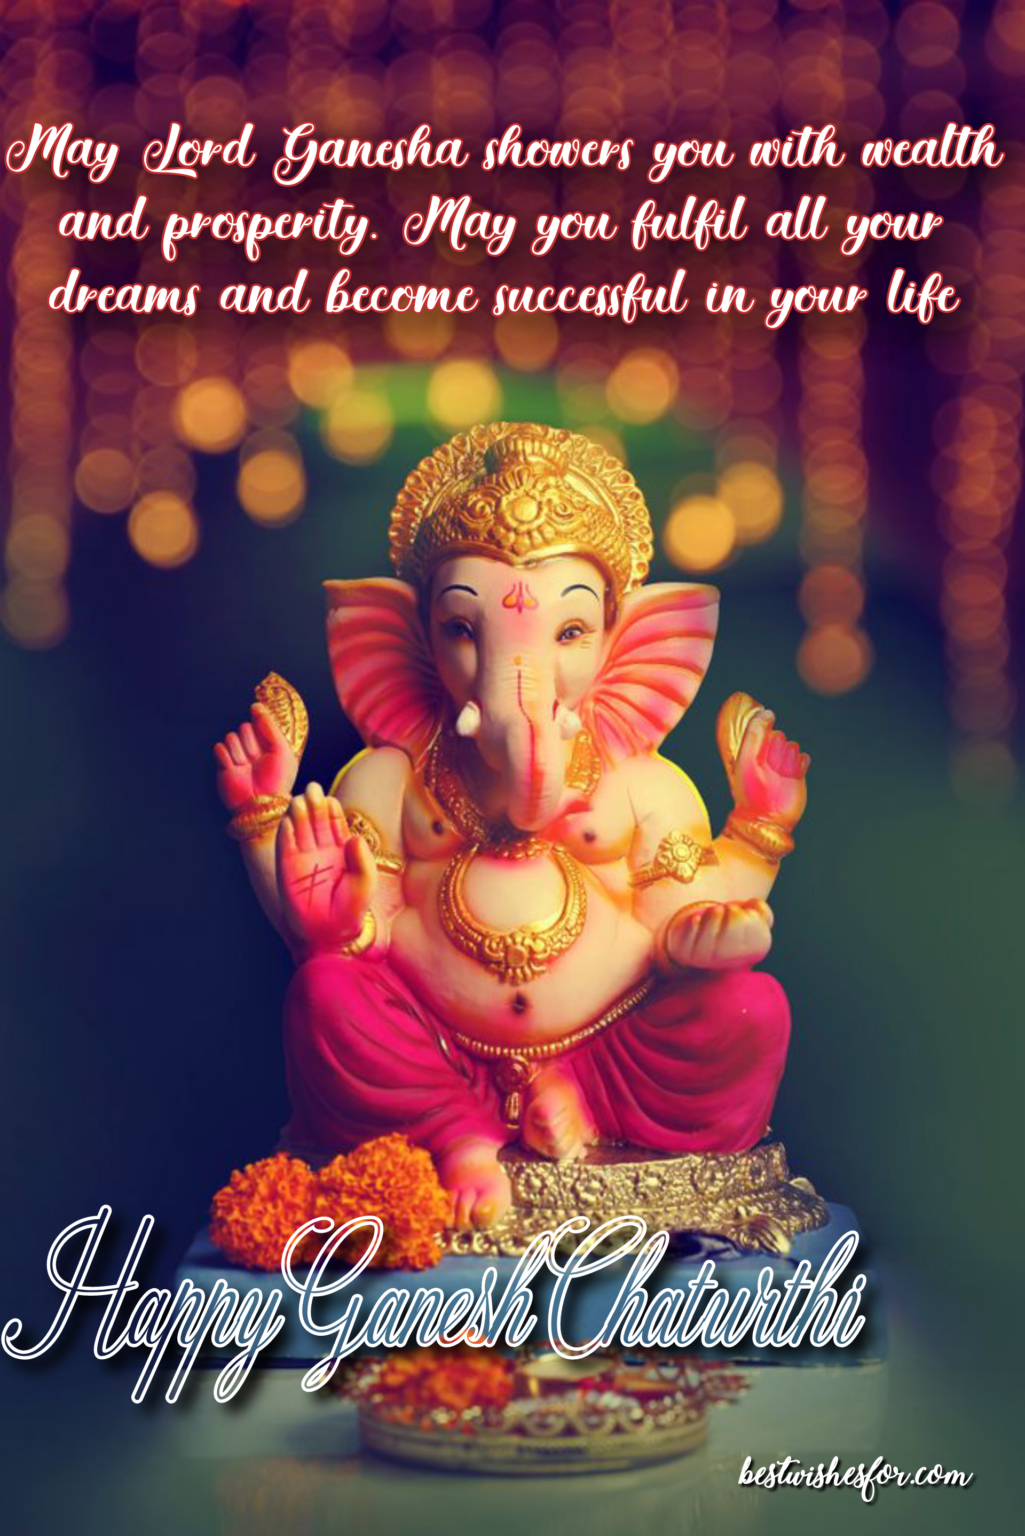 Happy Ganesh Chaturthi 2021 Wishes Quotes Images Messages And Sayings Best Wishes 3767